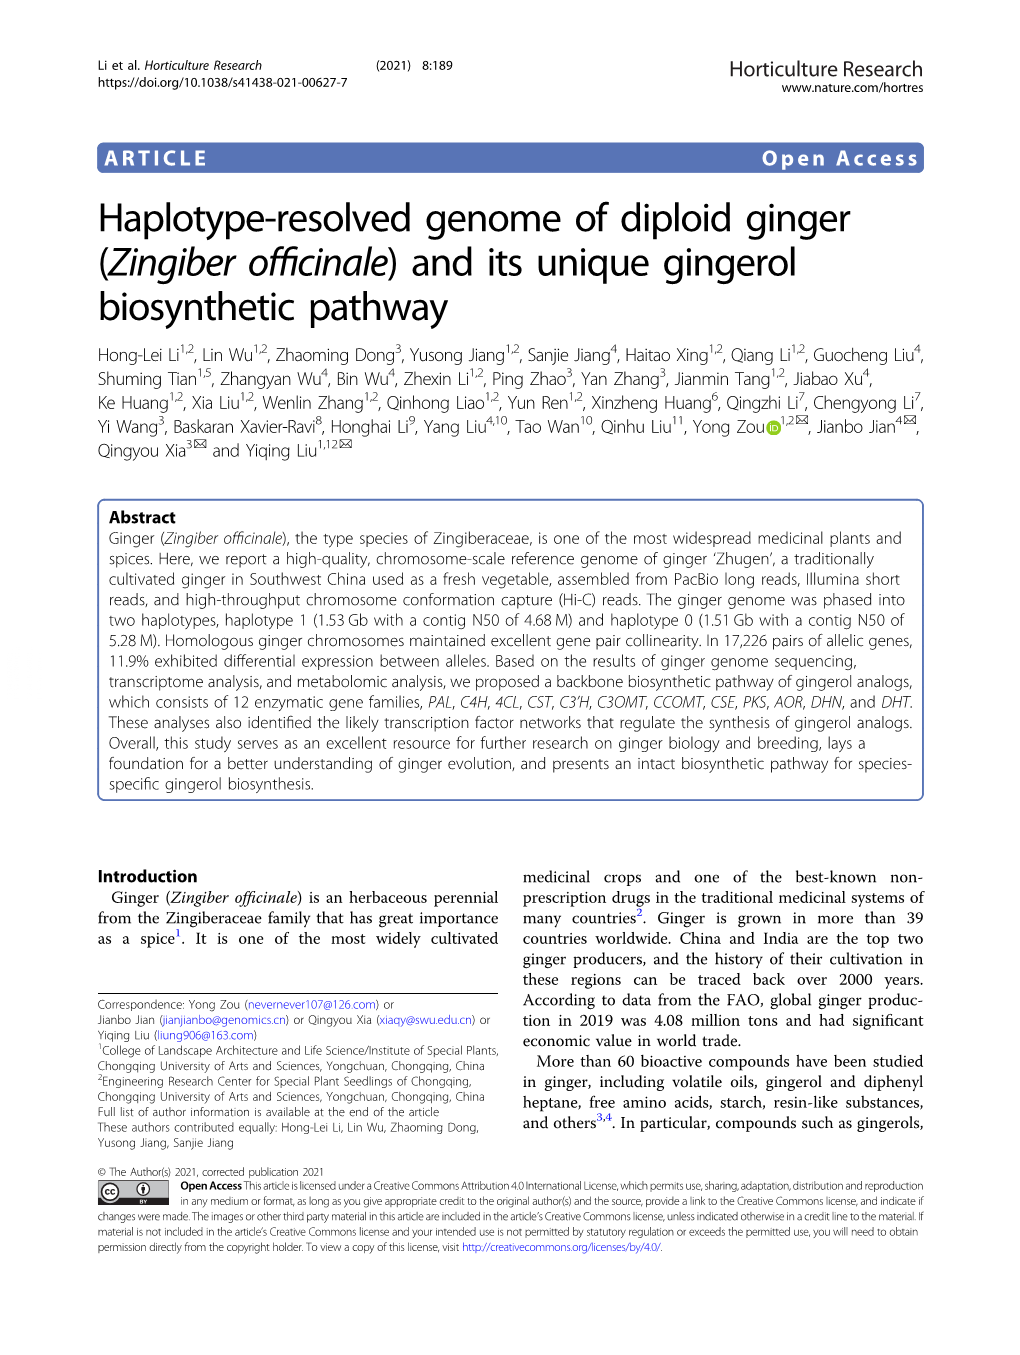 Haplotype-Resolved Genome of Diploid Ginger (Zingiber Officinale)